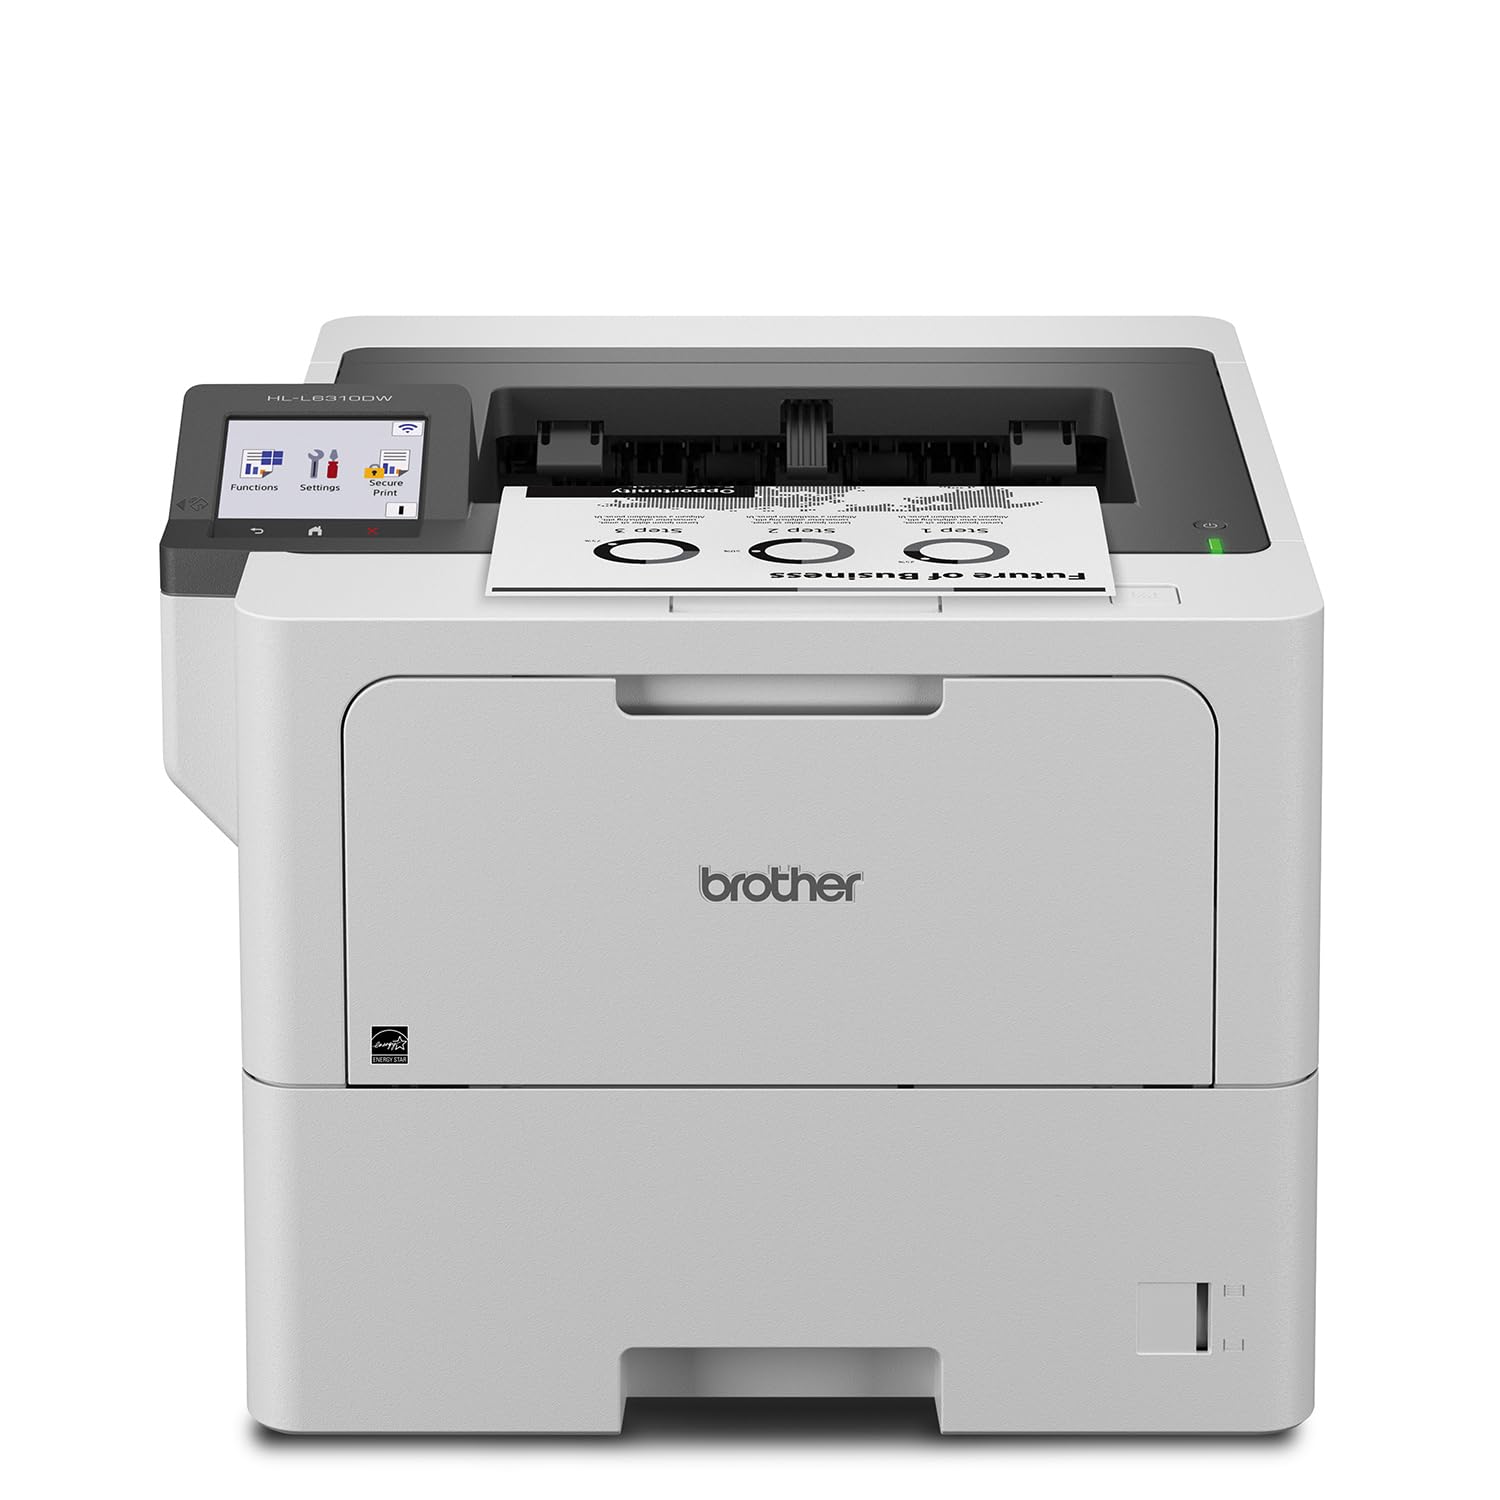 Brother HL-L6310DW Enterprise Monochrome Laser Printer with Low-Cost Printing, Wireless Networking, and Large Paper Capacity